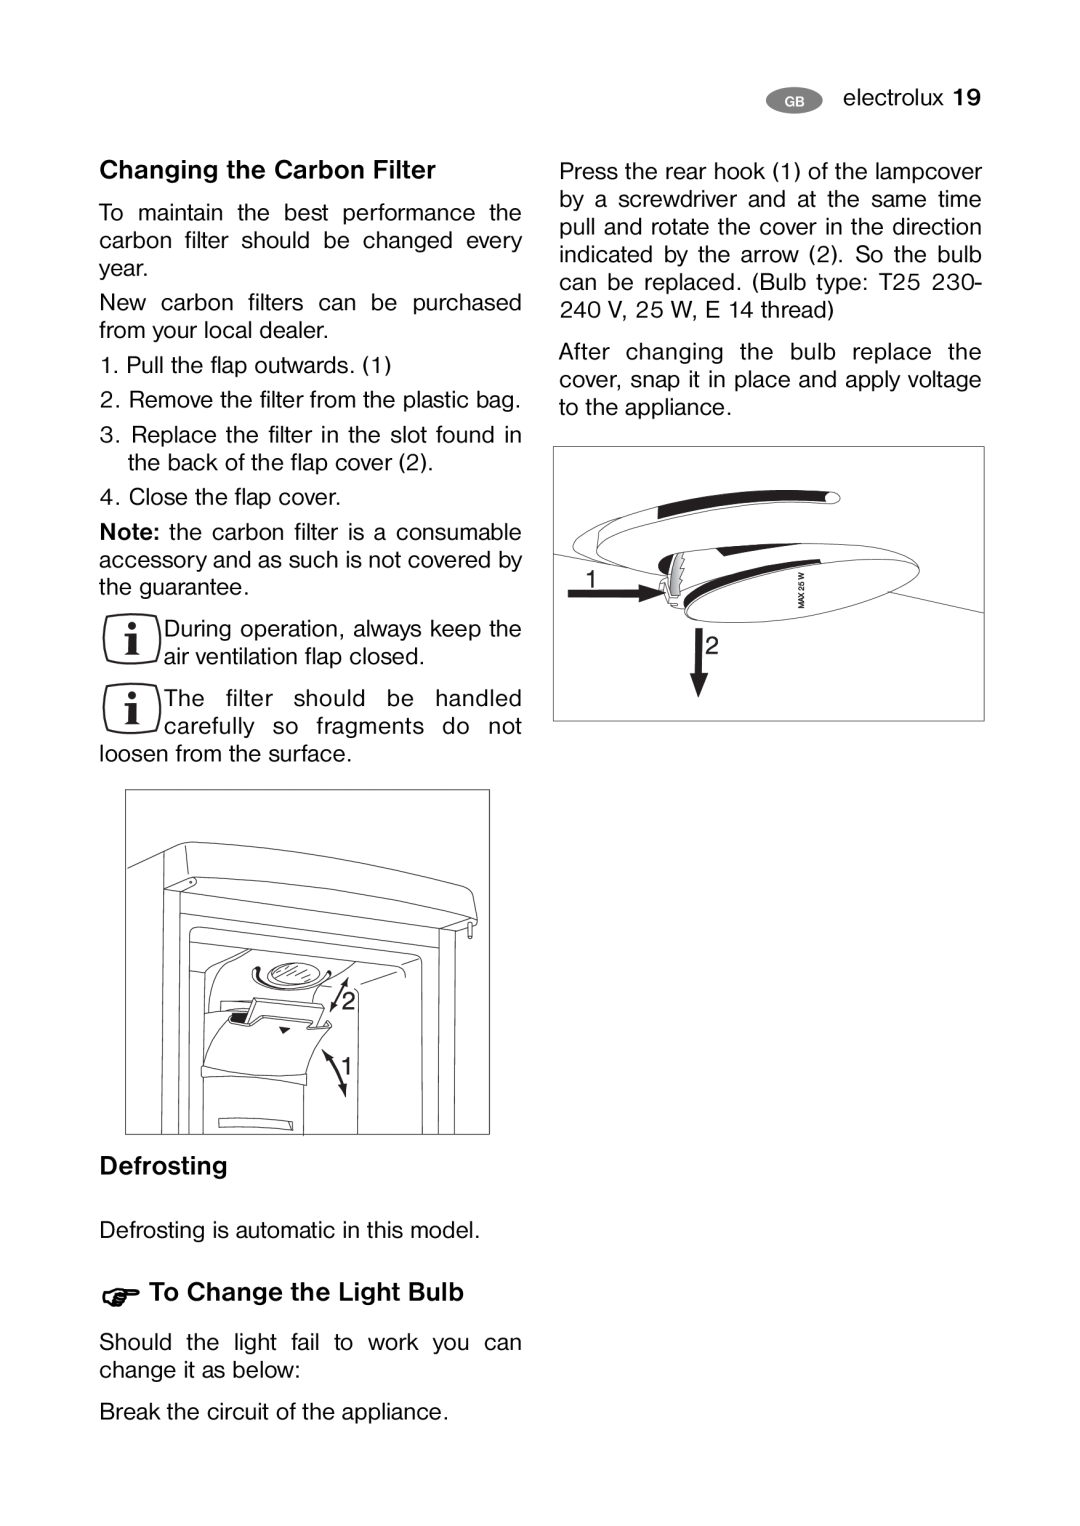 Electrolux ENB 40200 W user manual Changing the Carbon Filter, Defrosting, To Change the Light Bulb 